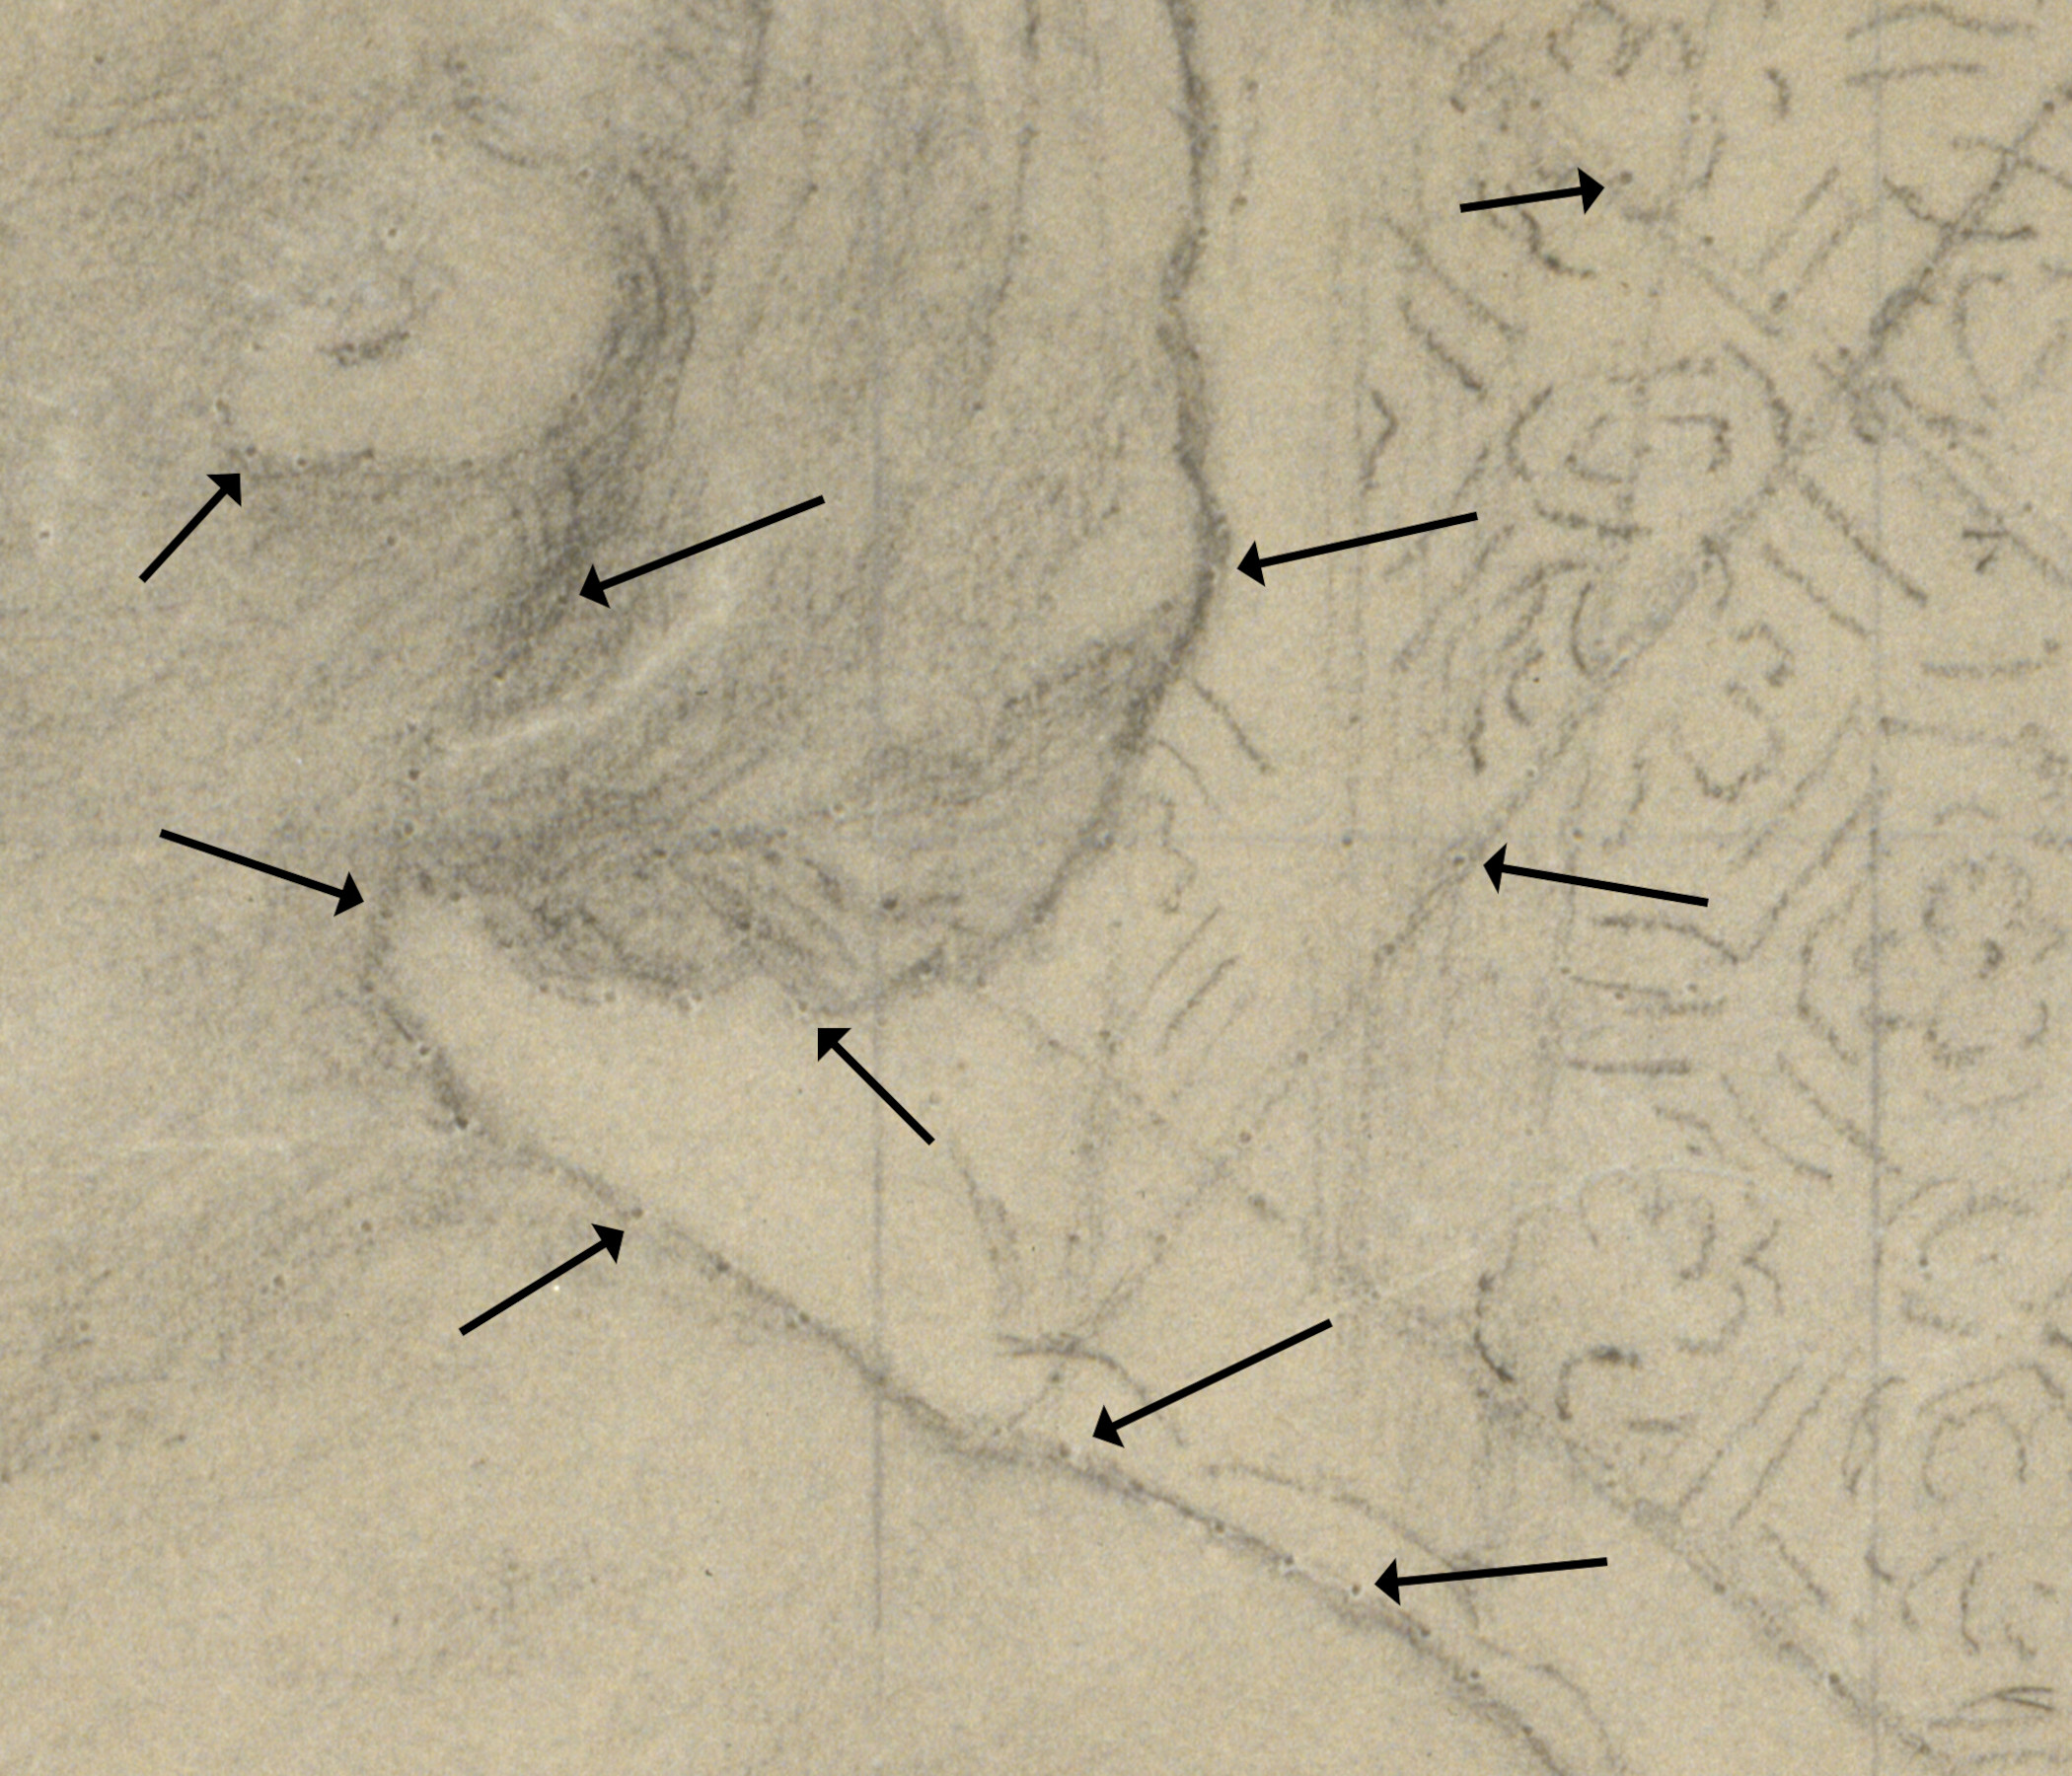 An annotated image highlighting holes in the paper support of a preparatory sketch.